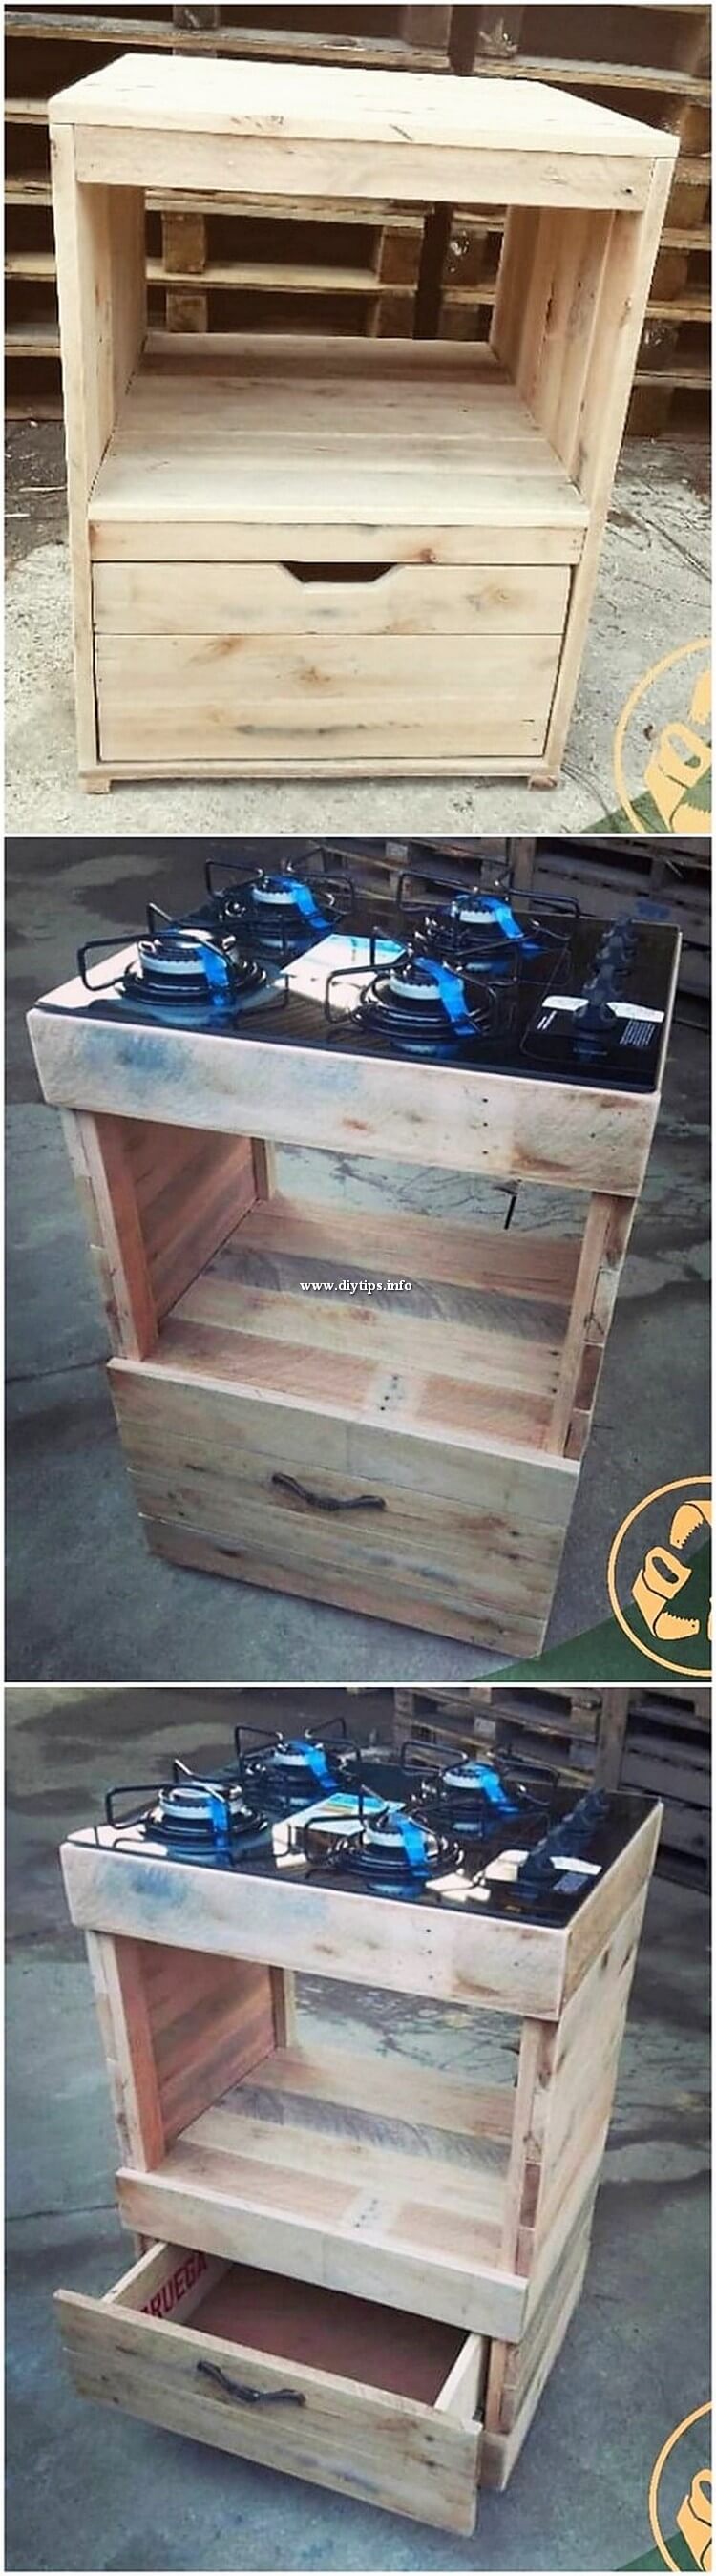 Pallet Stove Stand with Drawer